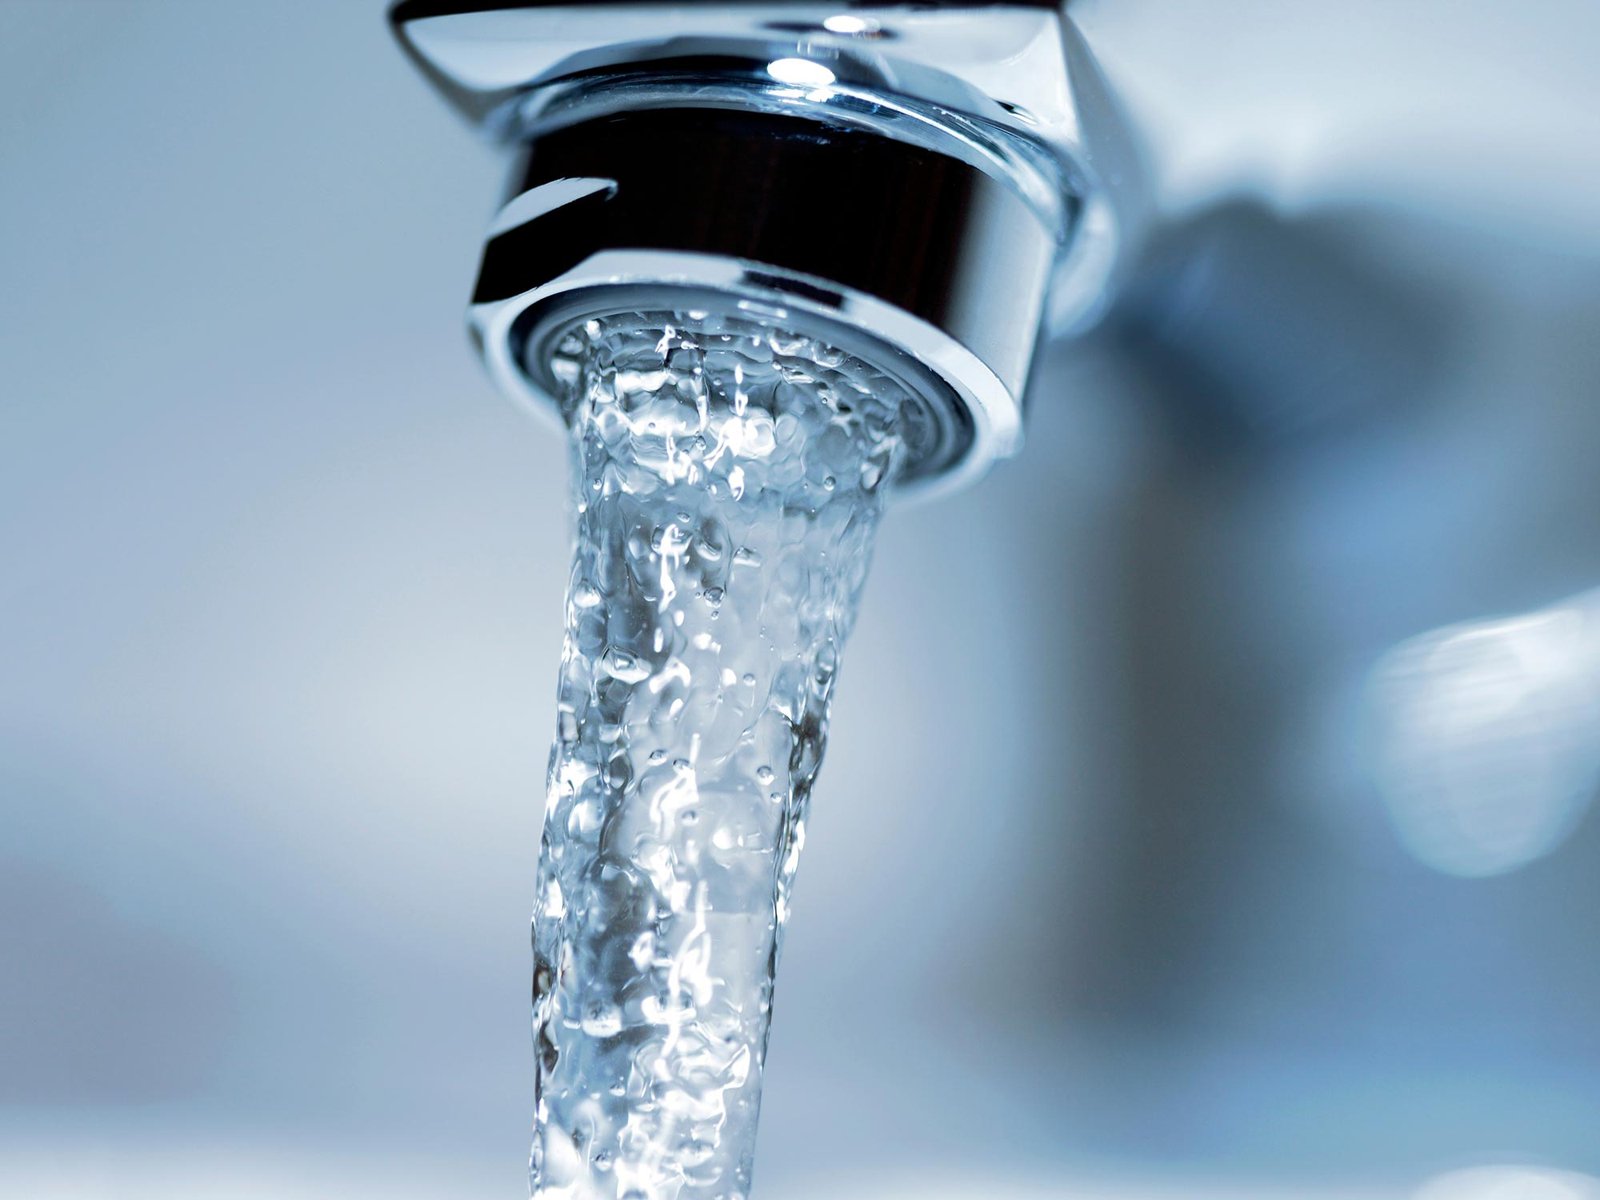 Johns Hopkins Researchers Discover Concerning Levels of Lead in Chicago Tap Water